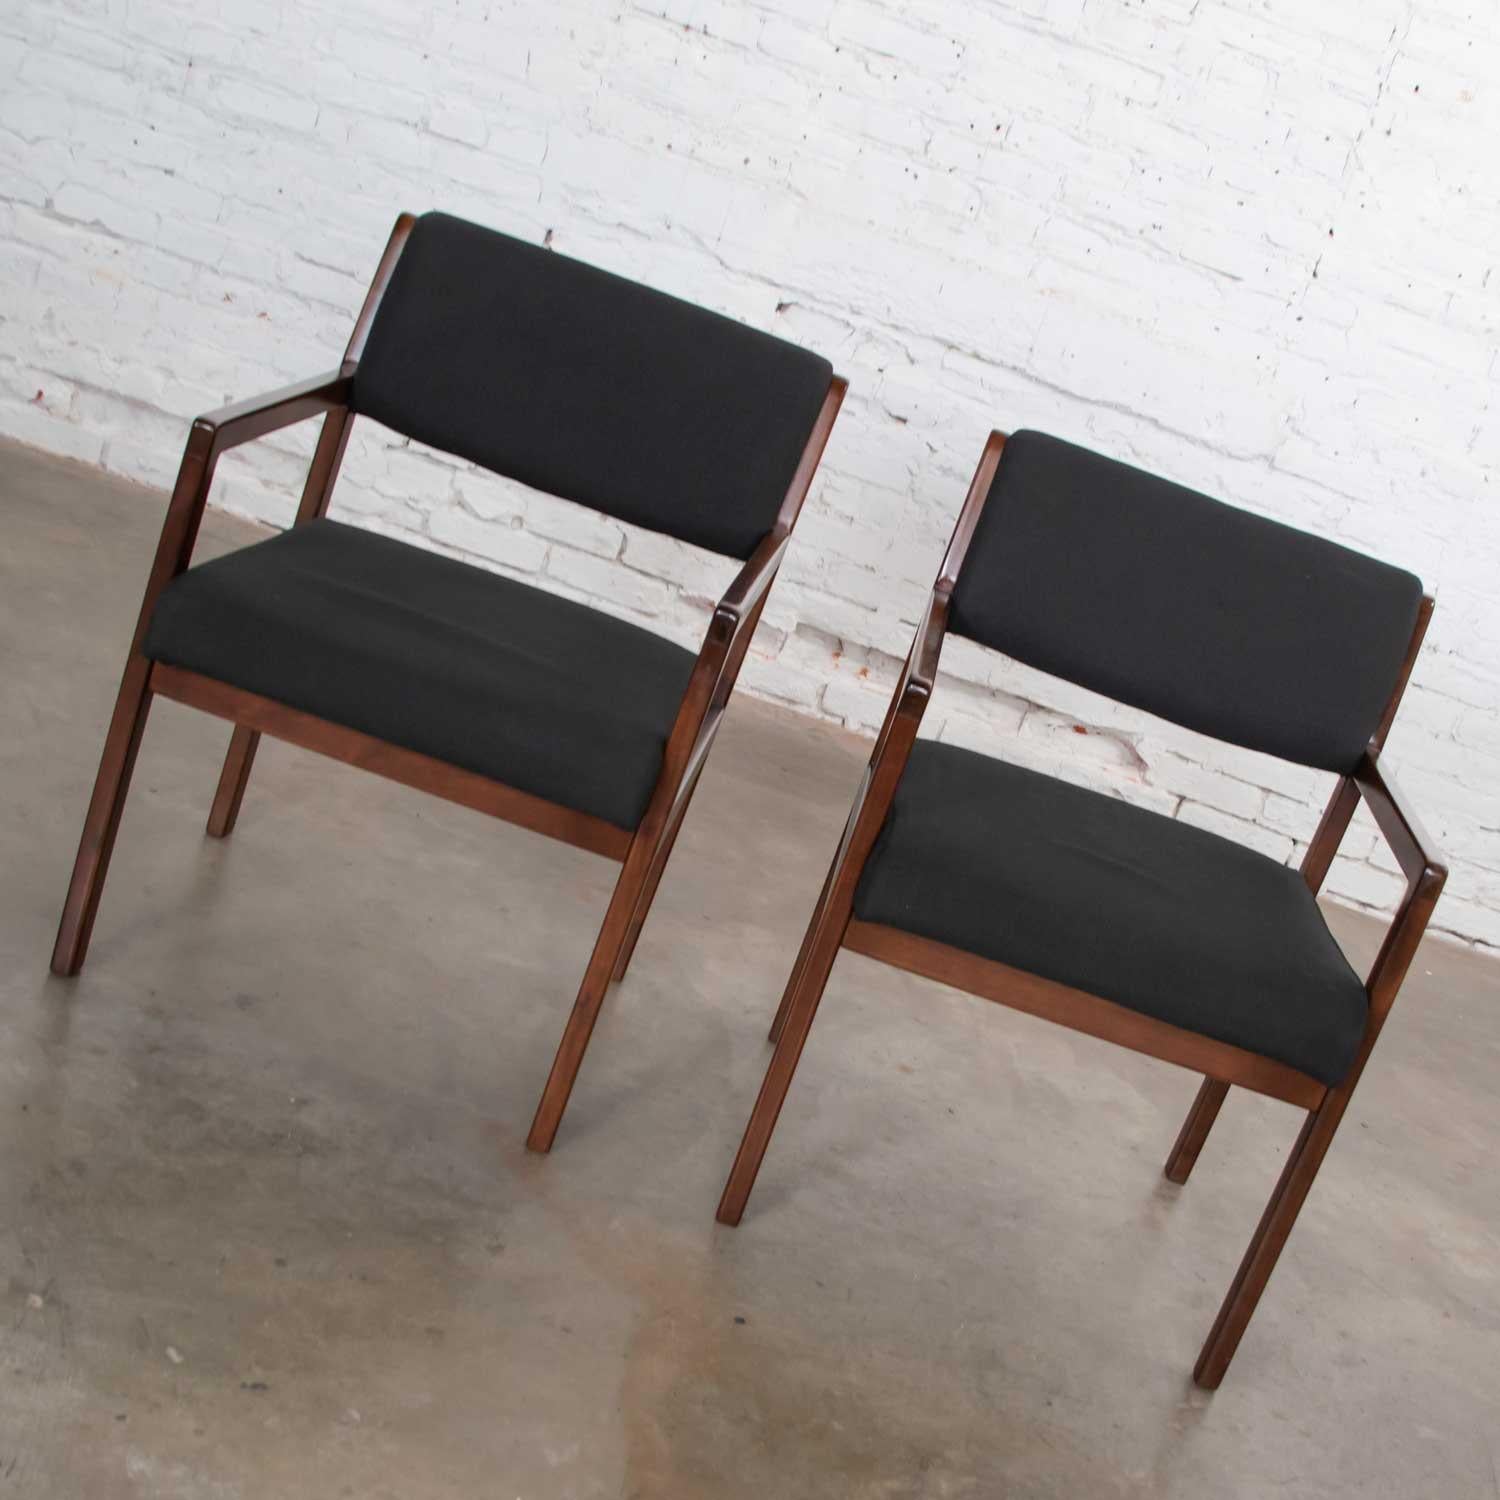 American Modern Pair of Black and Walnut Tone Wood Accent or Dining Armchairs by Haworth For Sale